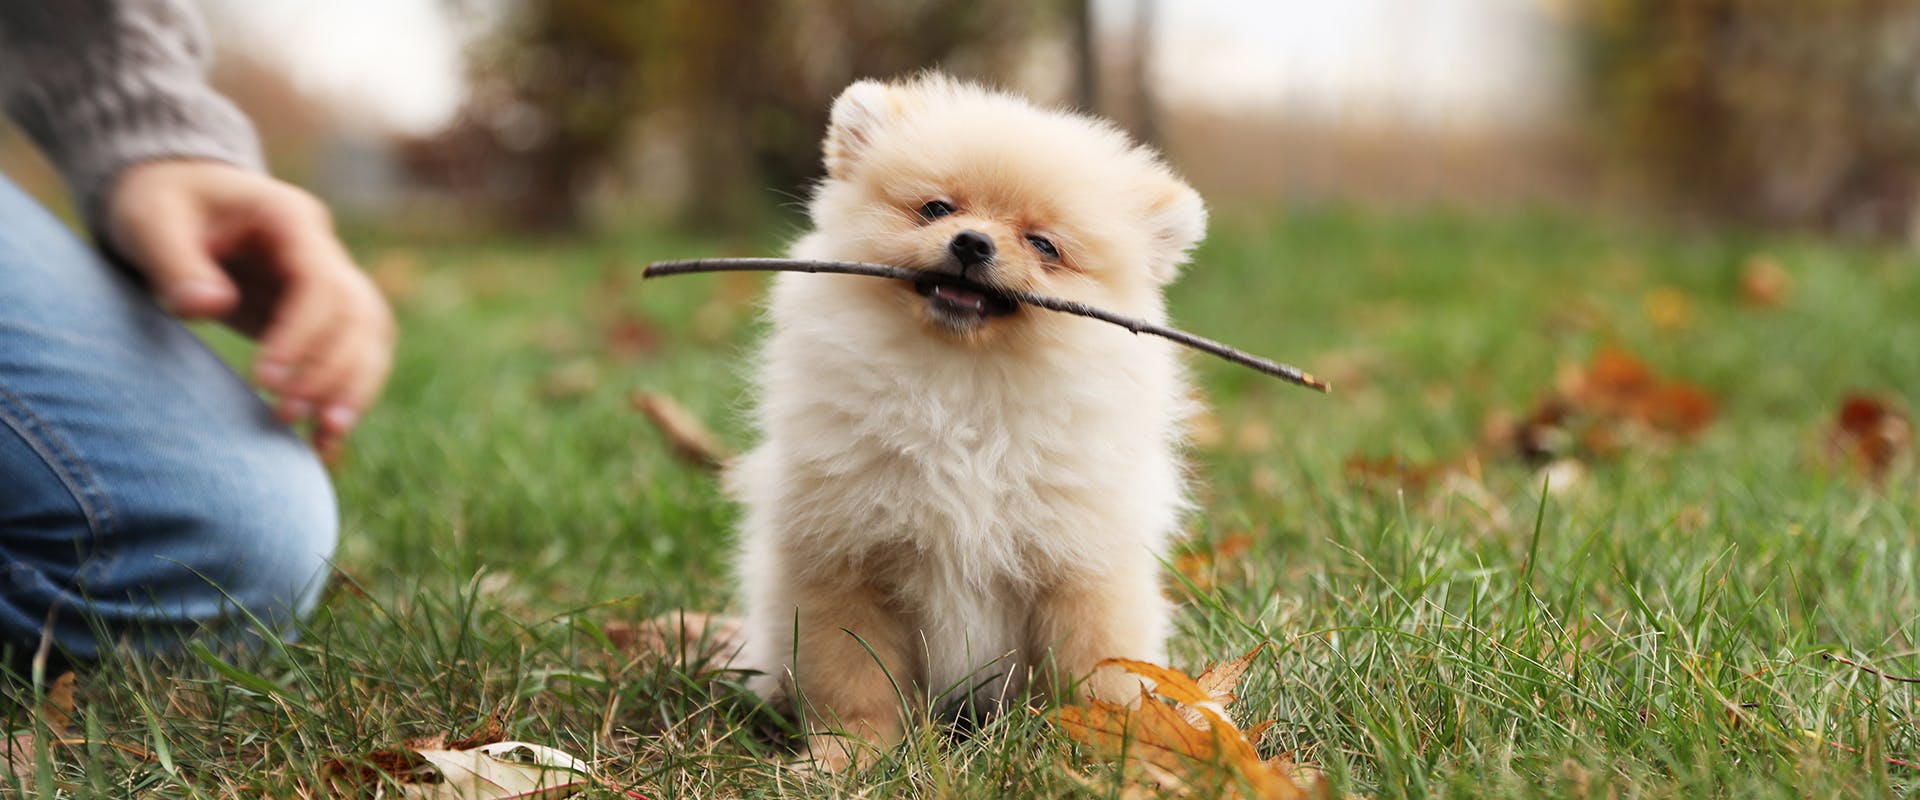 A cute Pomeranian puppy standing in a park, holding a stick in its mouth